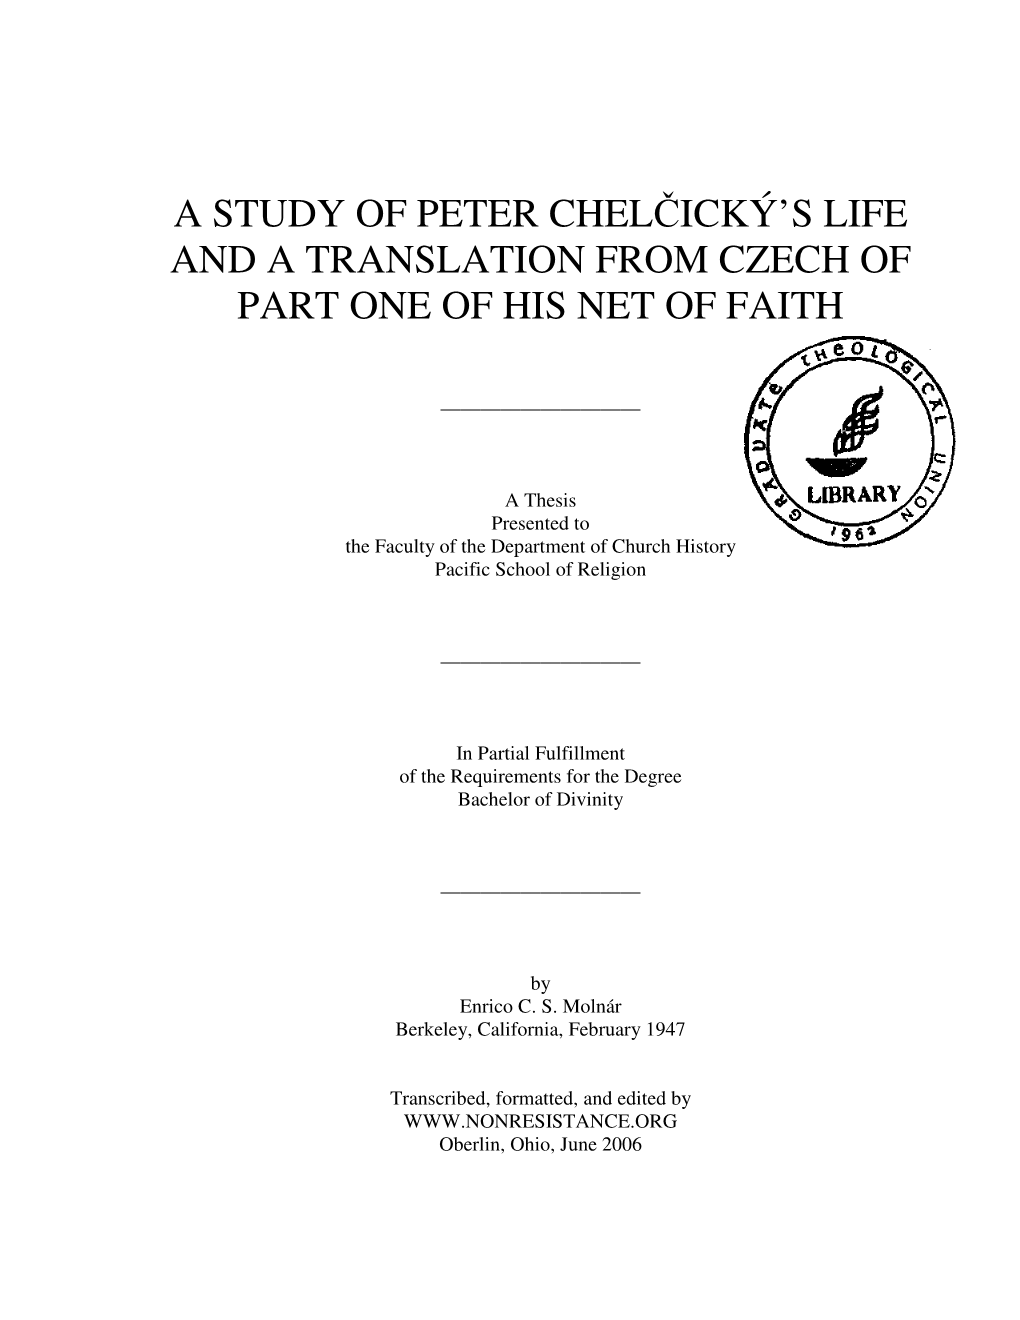 A Study of Peter Chelčický's Life and a Translation From